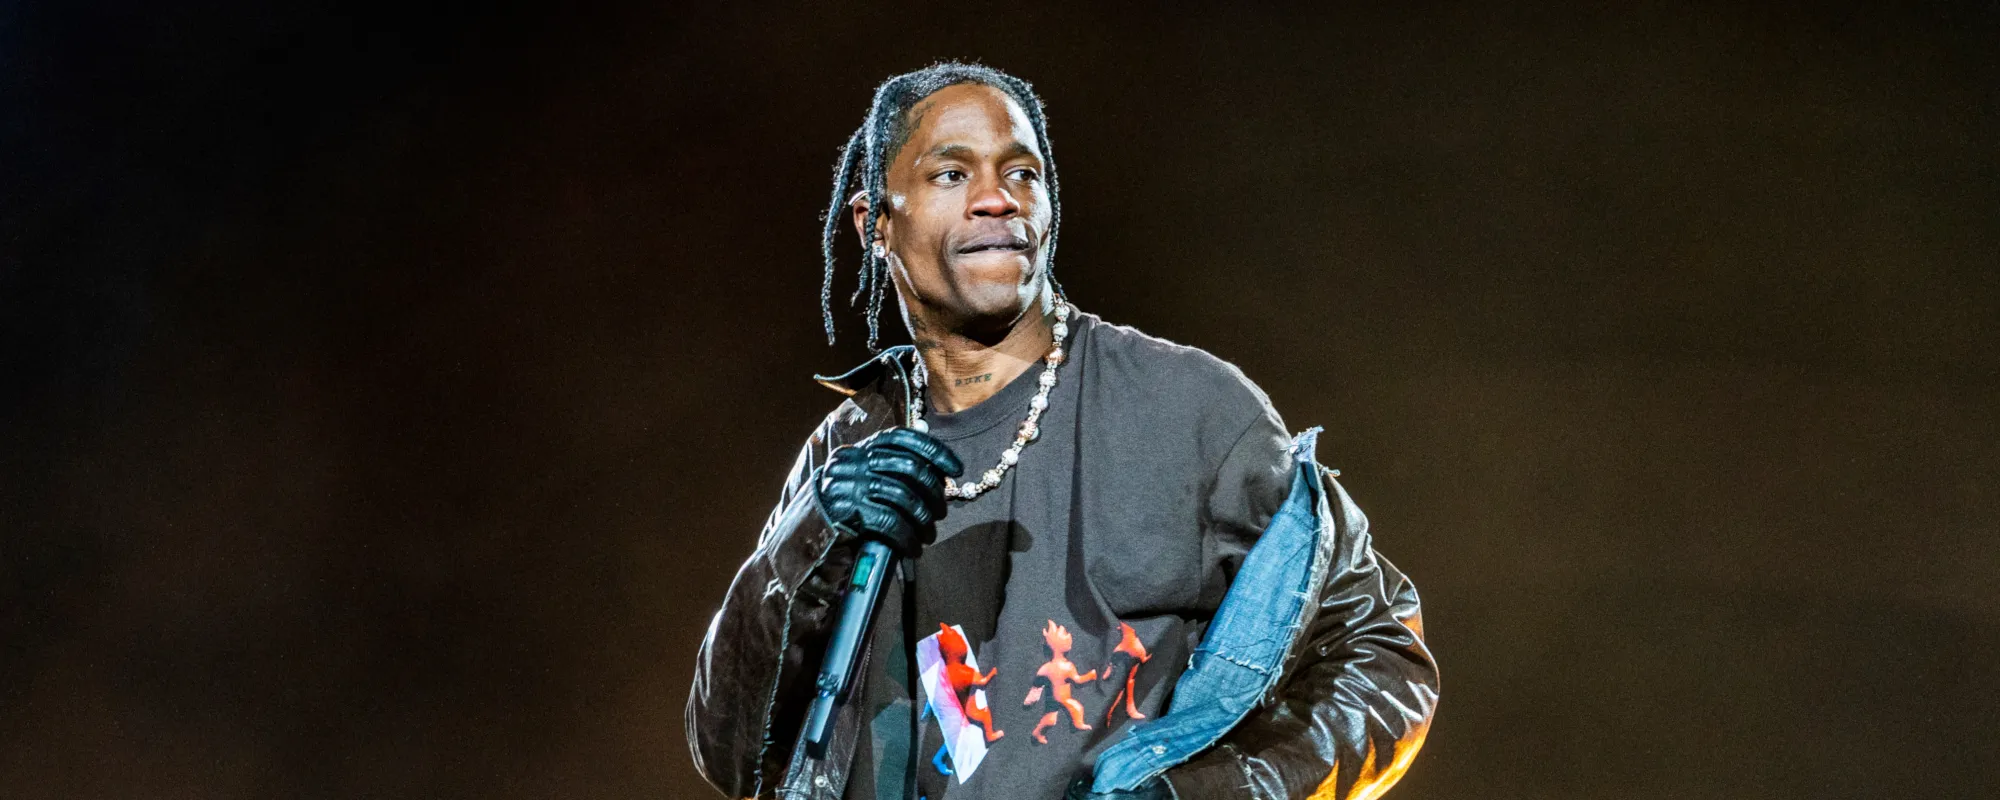 Astroworld Tragedy Still Unresolved: 275 Lawsuits Combined & Hulu Documentary Pulled